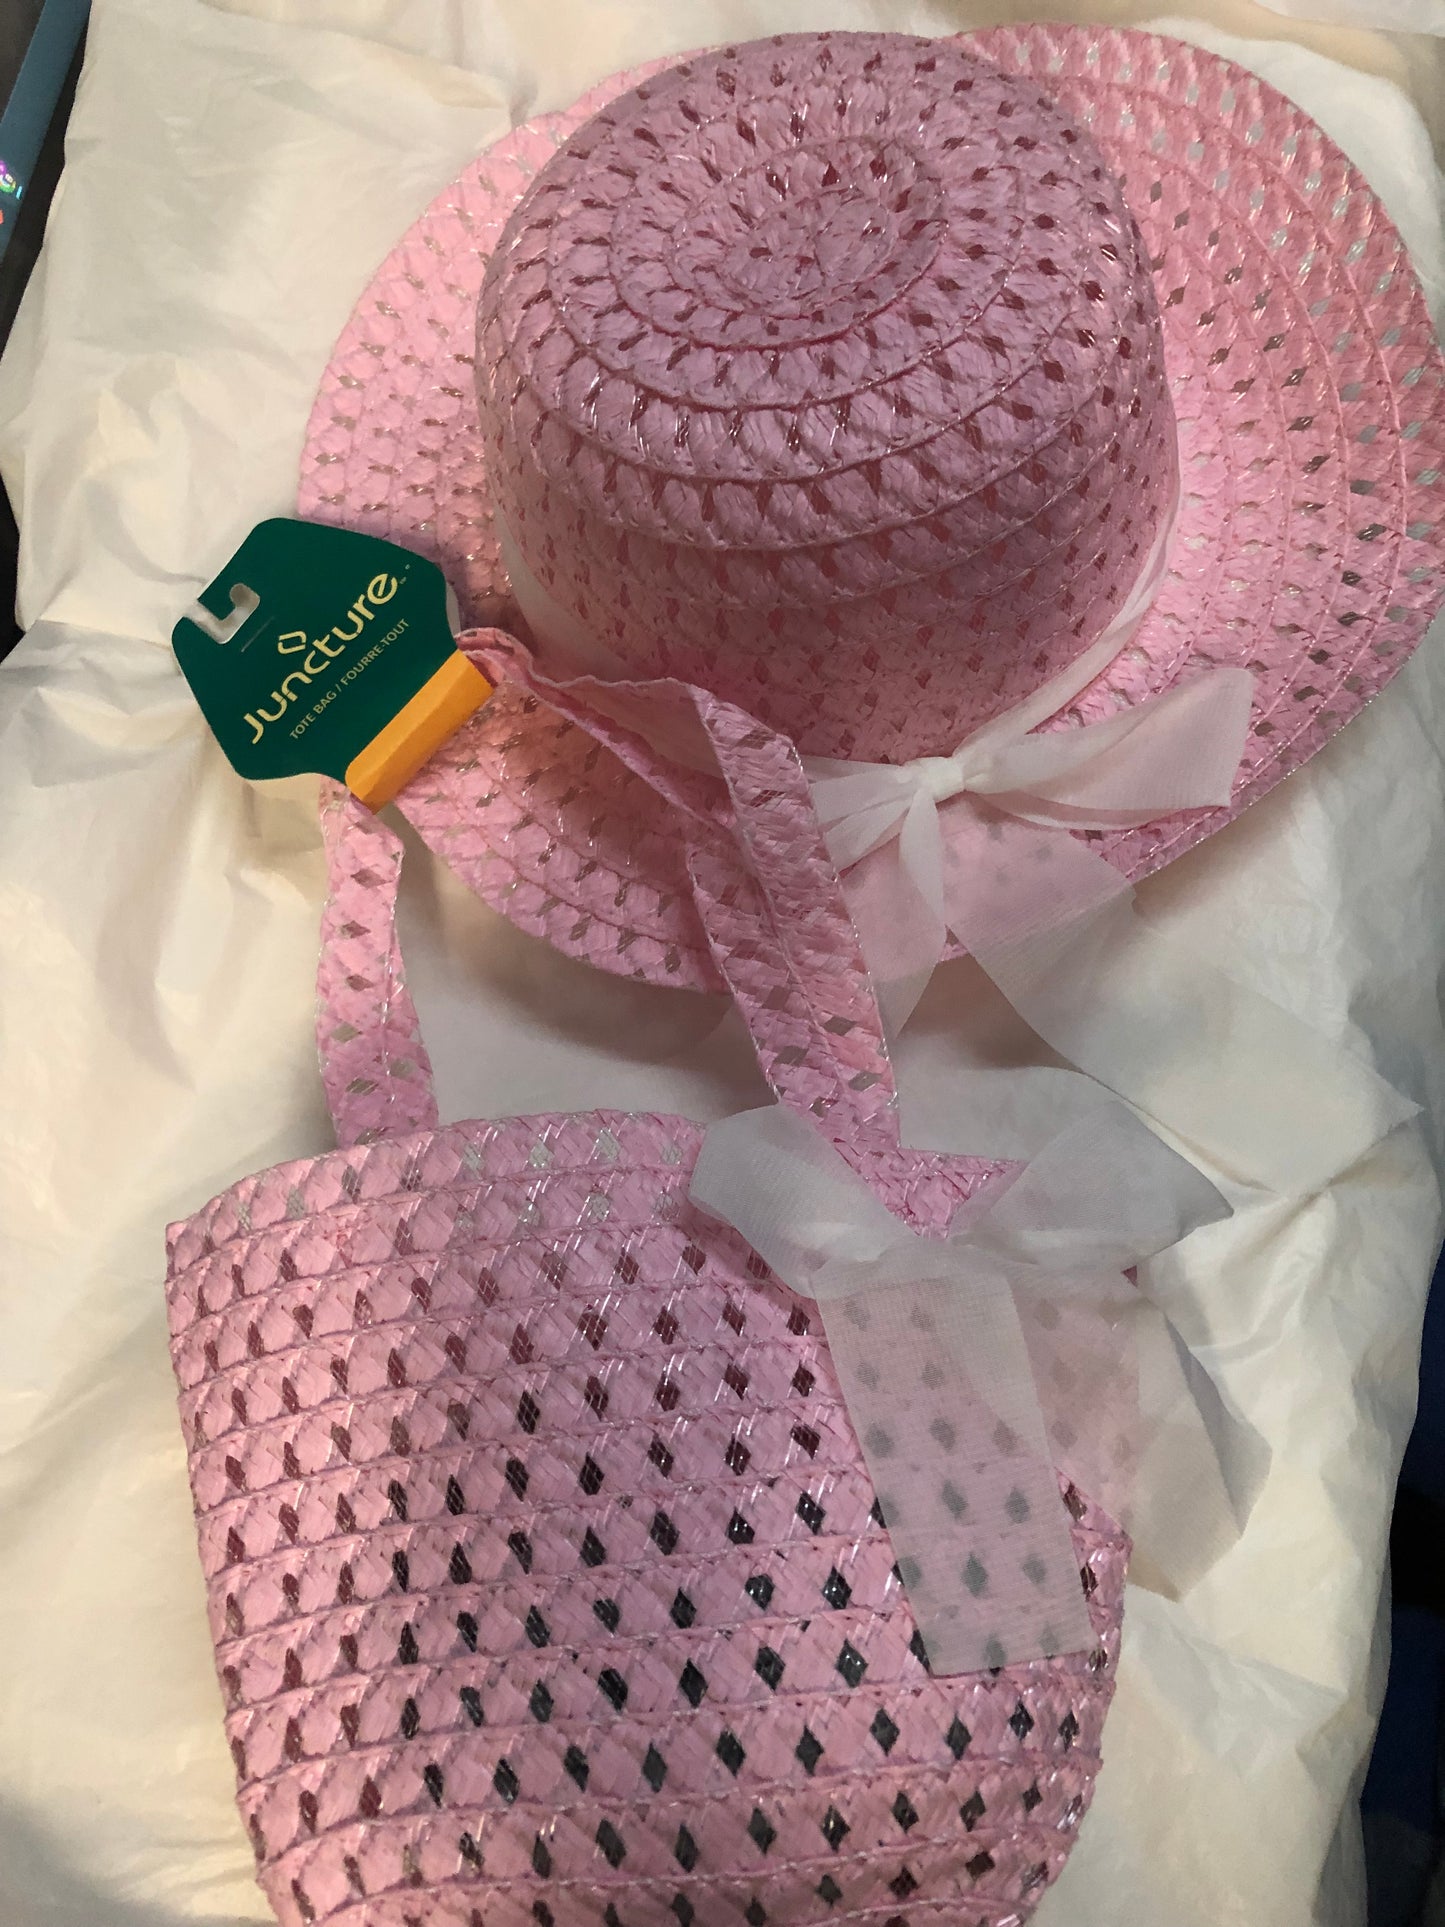 Girls Easter Dress Up Hat And Purse Set Color Pink "New Arrival"